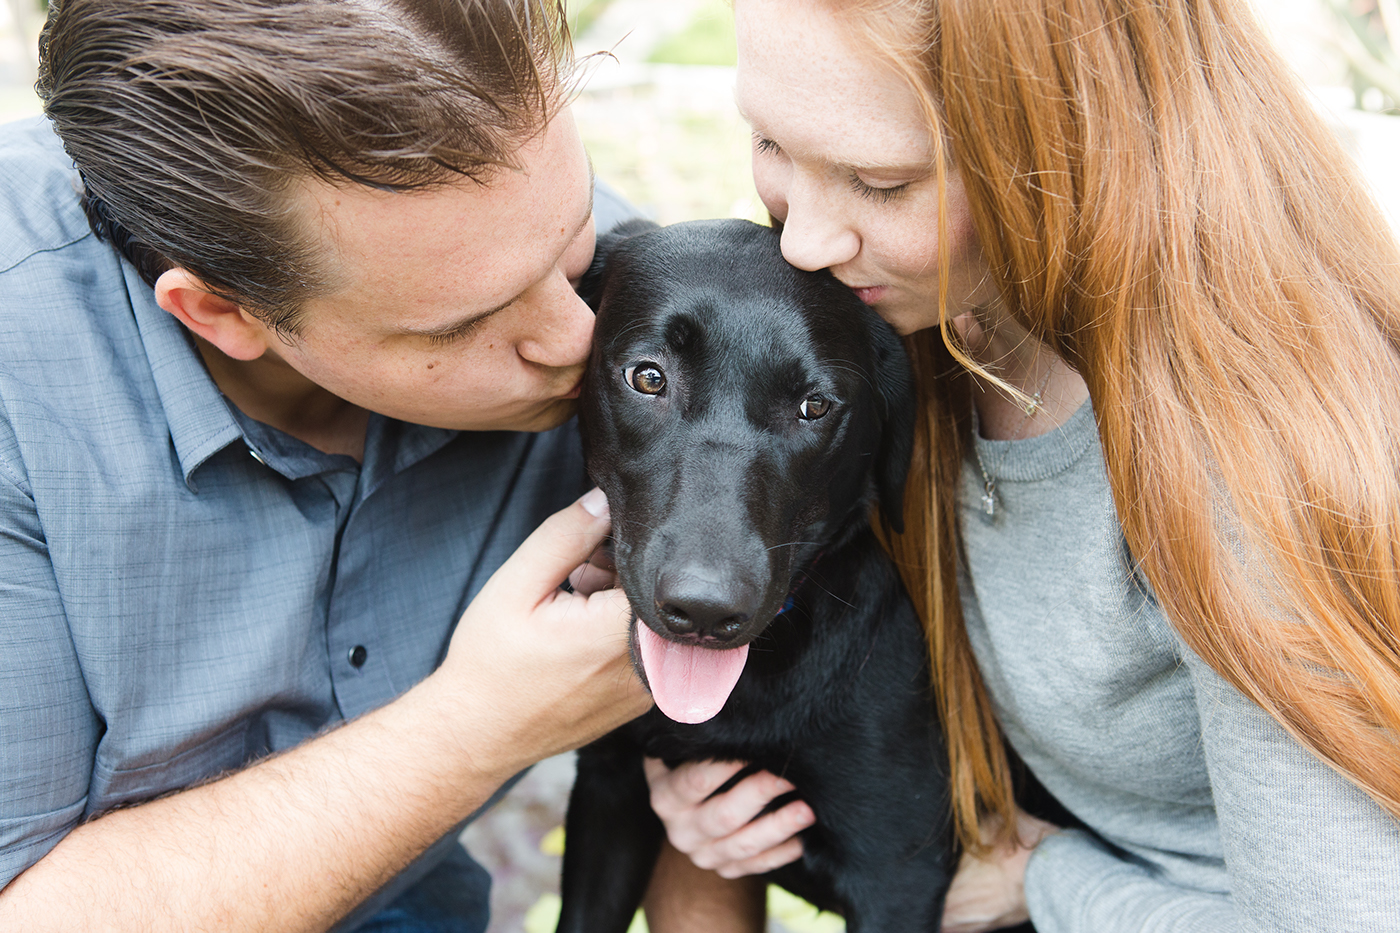 pet photography dog Love family photoshoot lifestyle best friend paws Labrador puppy